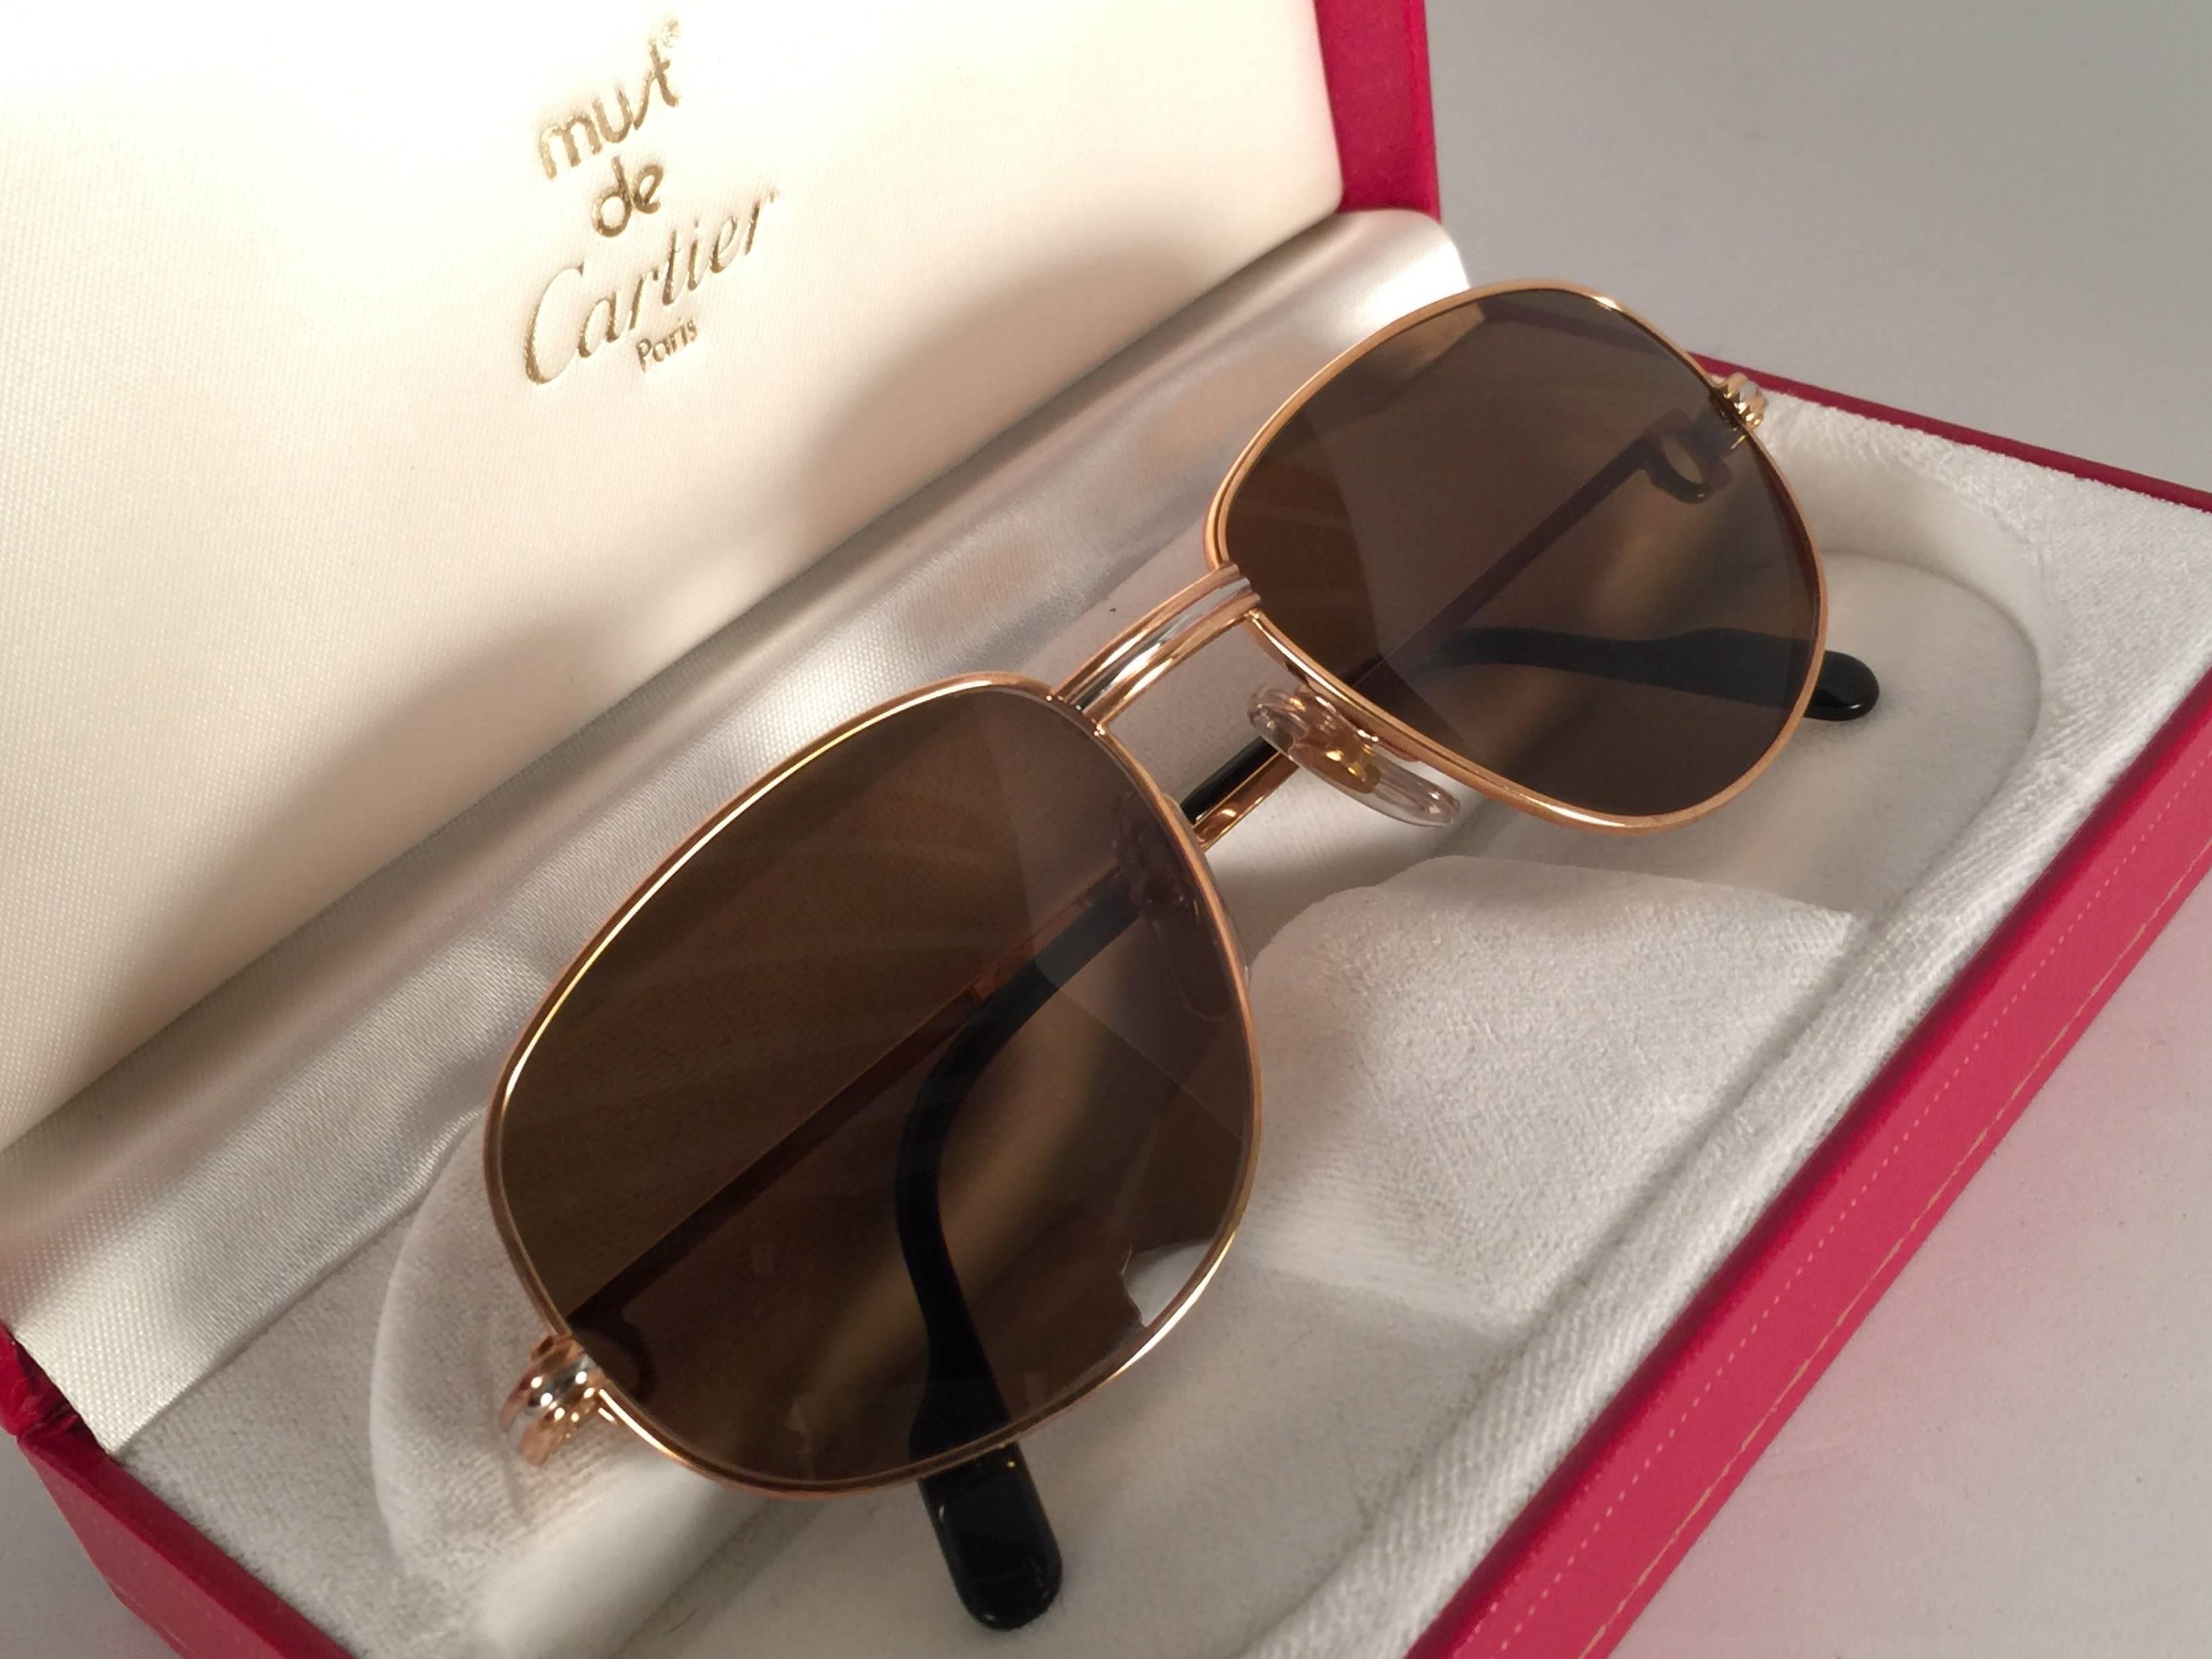 Rare rose gold Cartier Romance Santos sunglasses with brown (uv protection)lenses.  
Frame is with the front and sides in rose and white gold.  All hallmarks. 
Red enamel with Cartier gold signs on the ear paddles. 
Both arms sport the C from